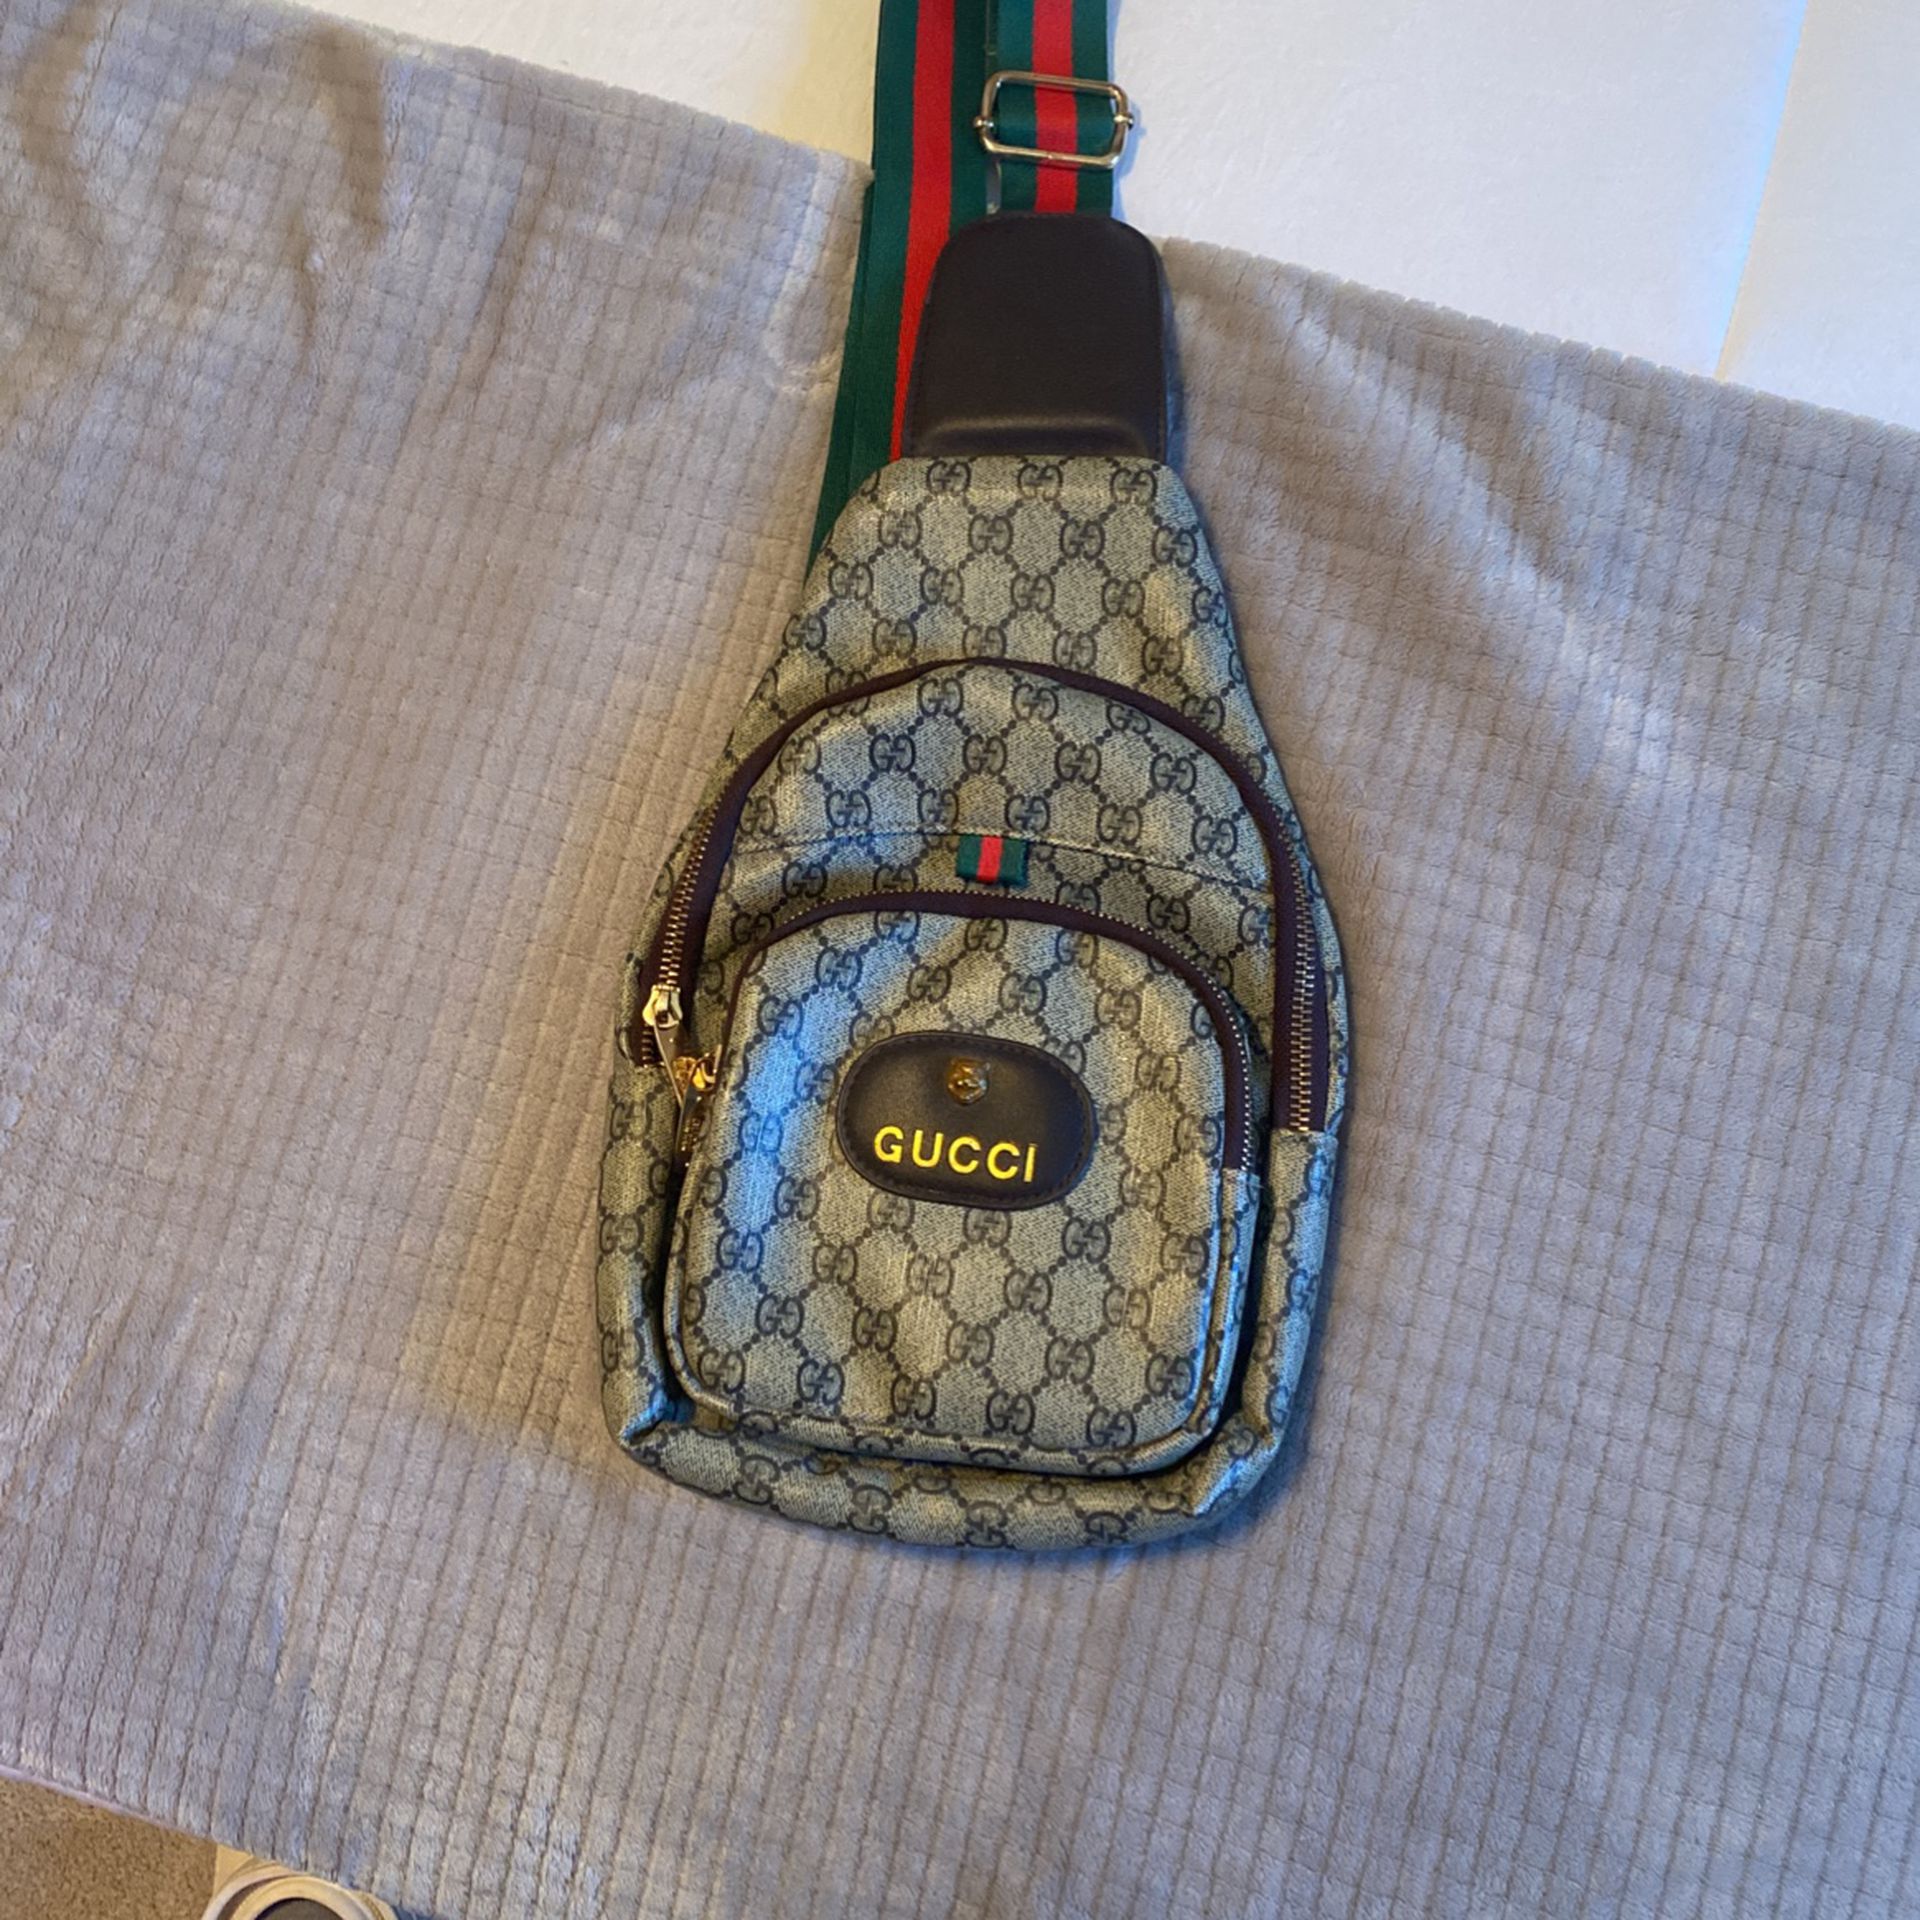 Gucci large hobo bag $600 for Sale in Garland, TX - OfferUp